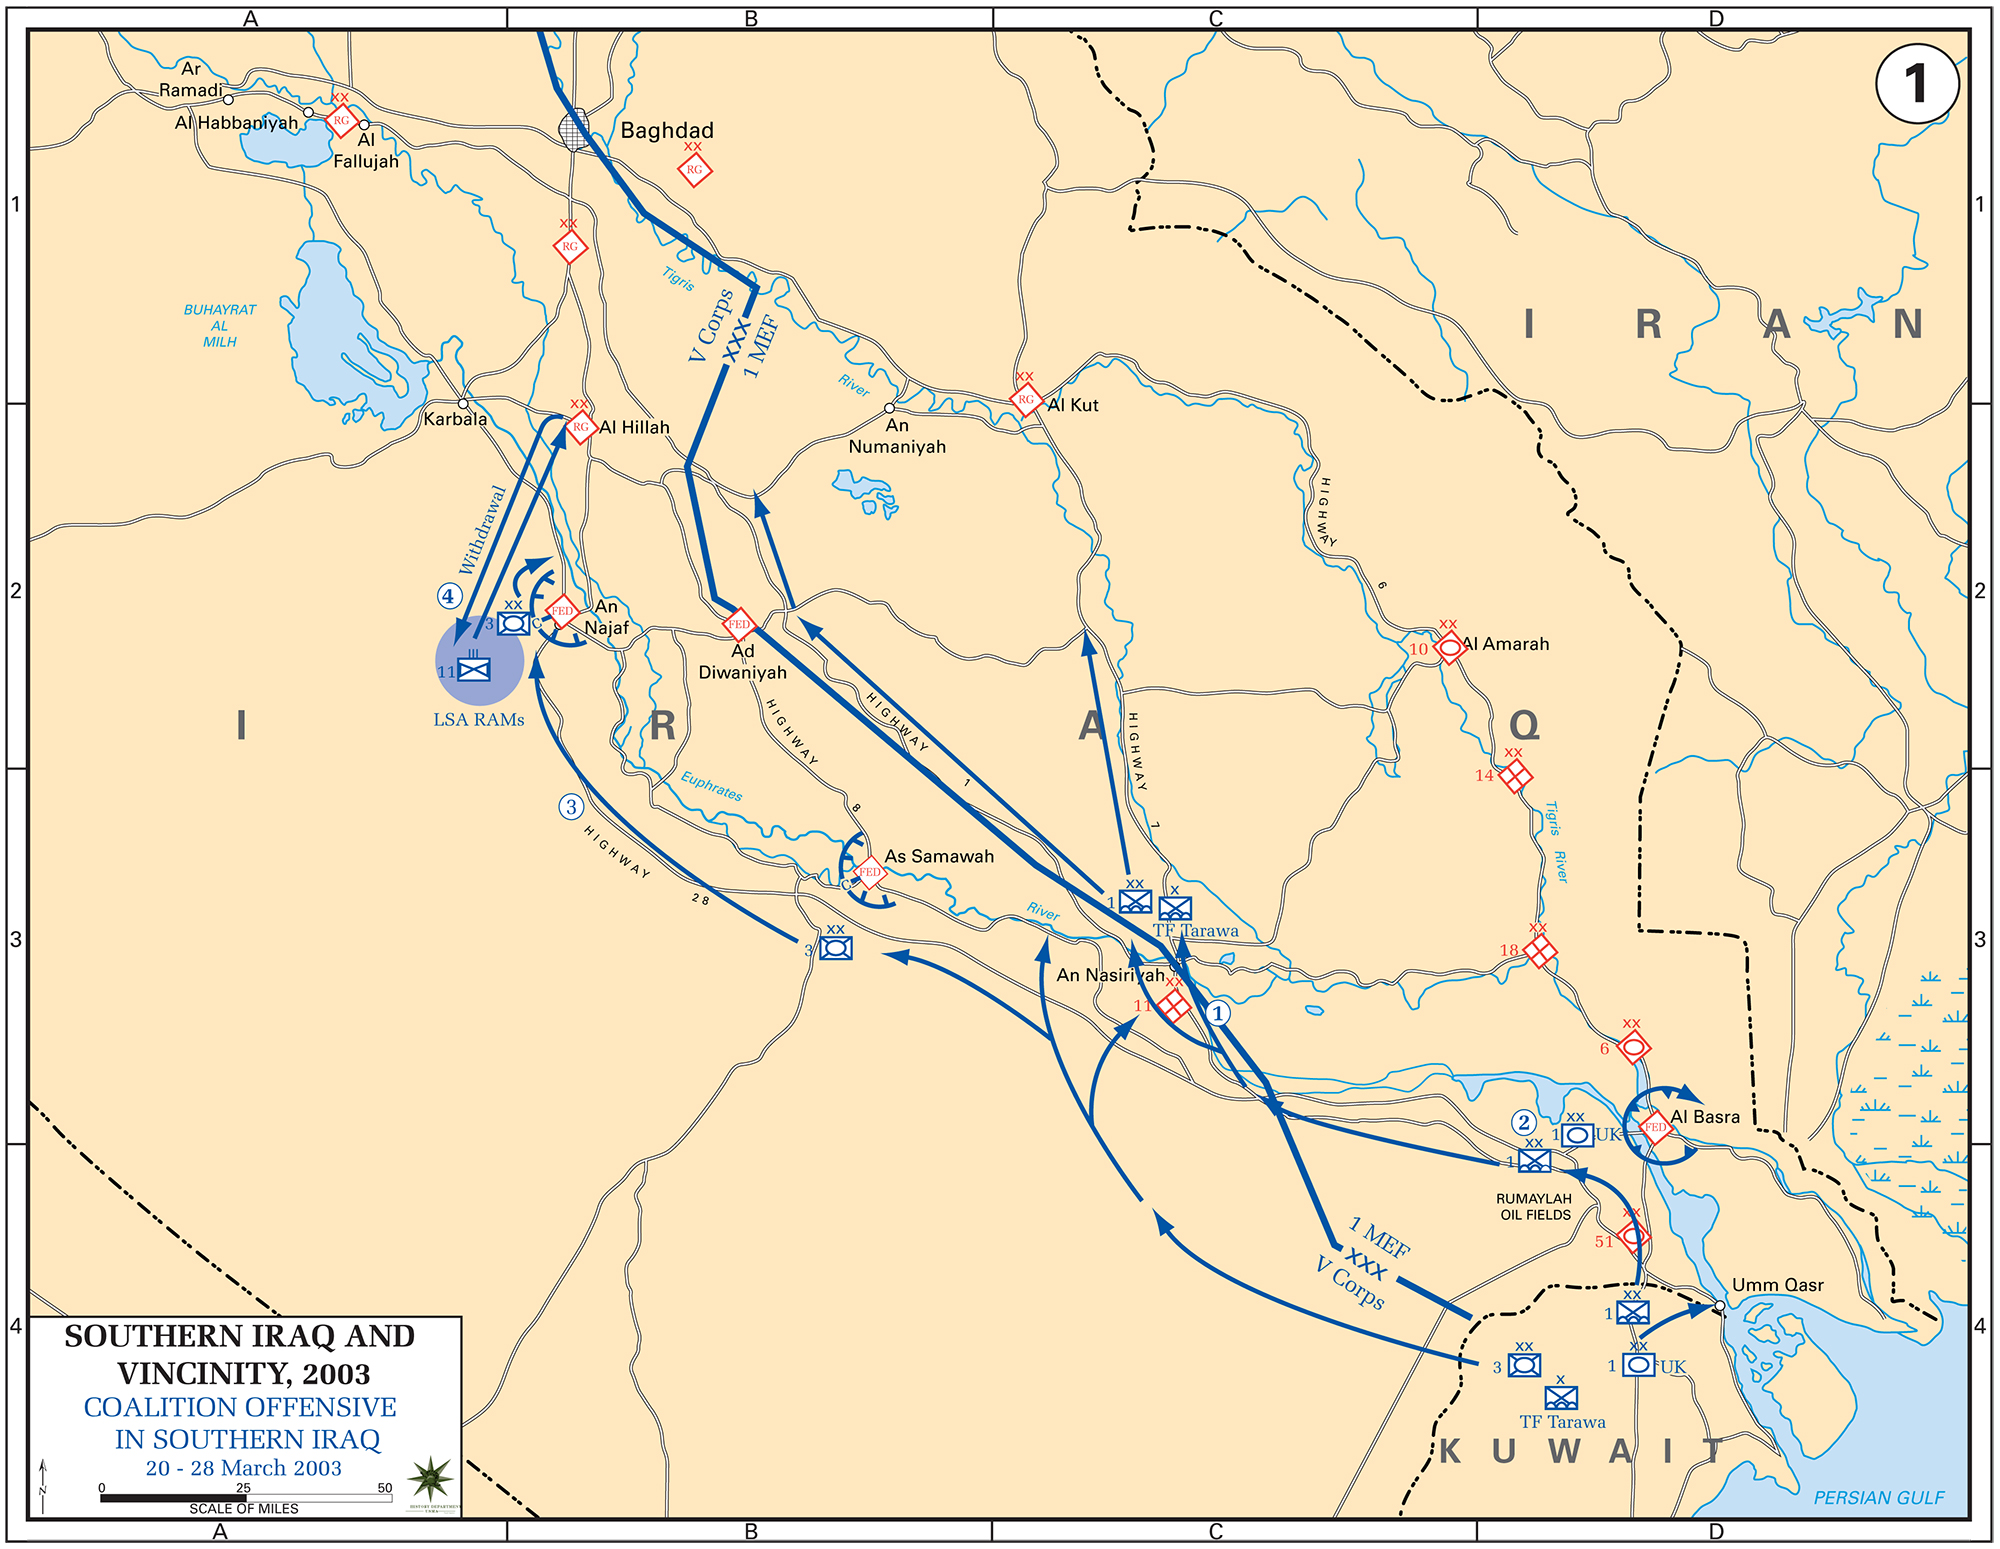 History Map of Iraq 2003. Southern Iraq and Vicinity, Coalition Offensive March 20-28, 2003.